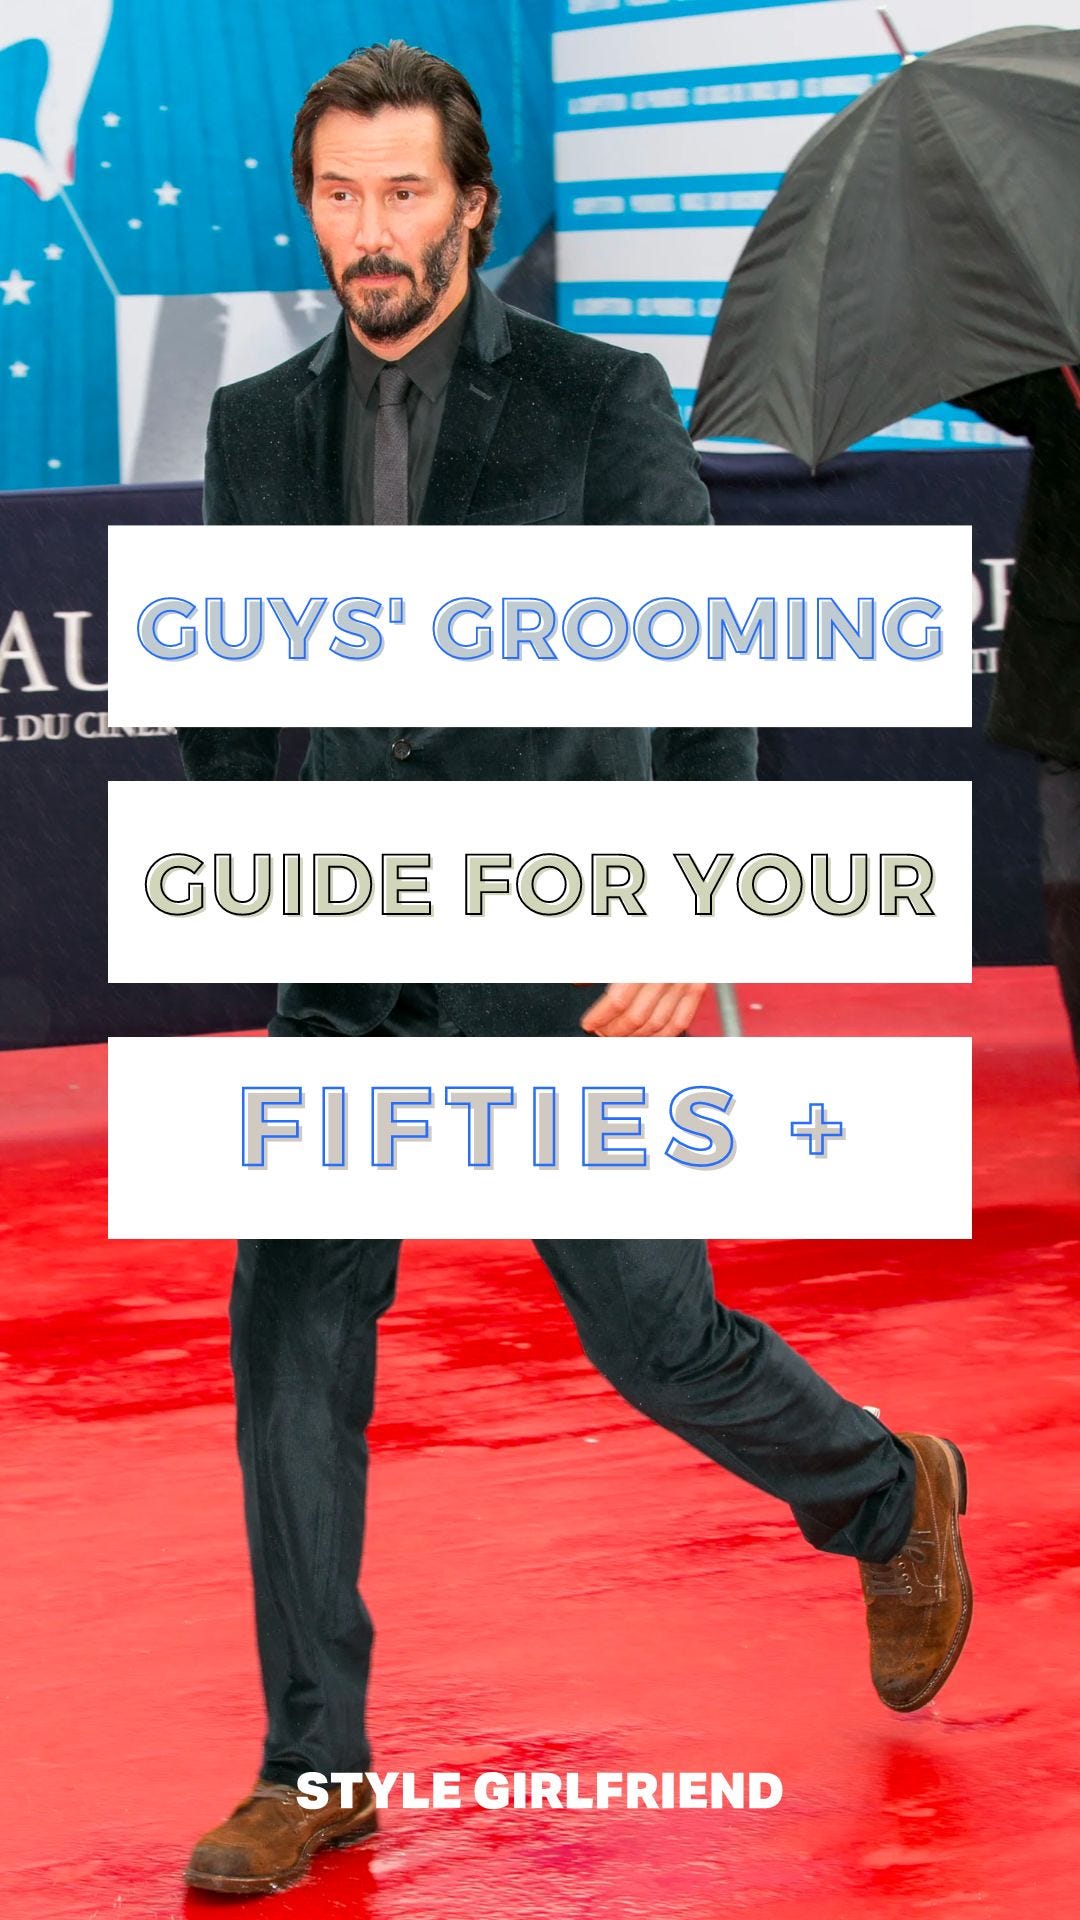 guys grooming guide for your 50s and beyond